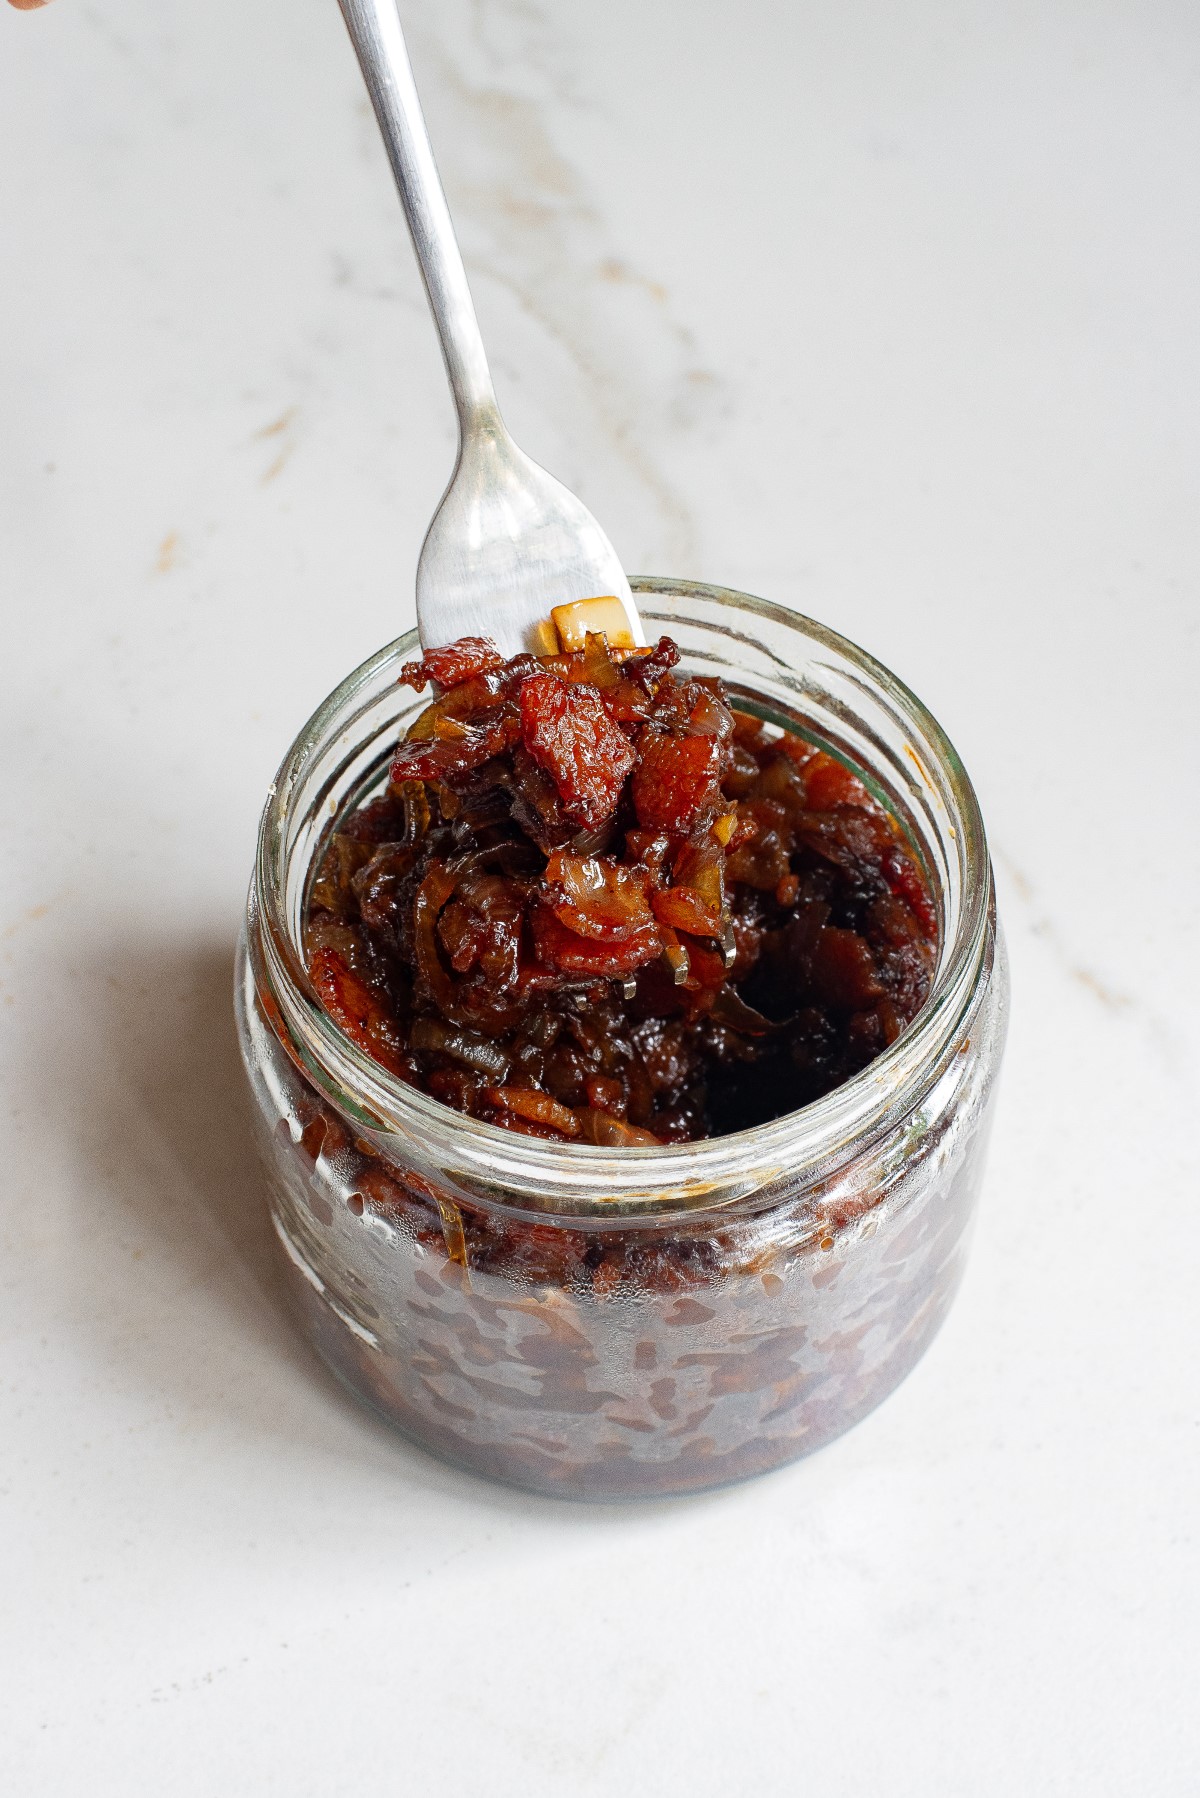 Onion Bacon Jam in a small glass jar with a fork lifting some of the jam out of the jar.